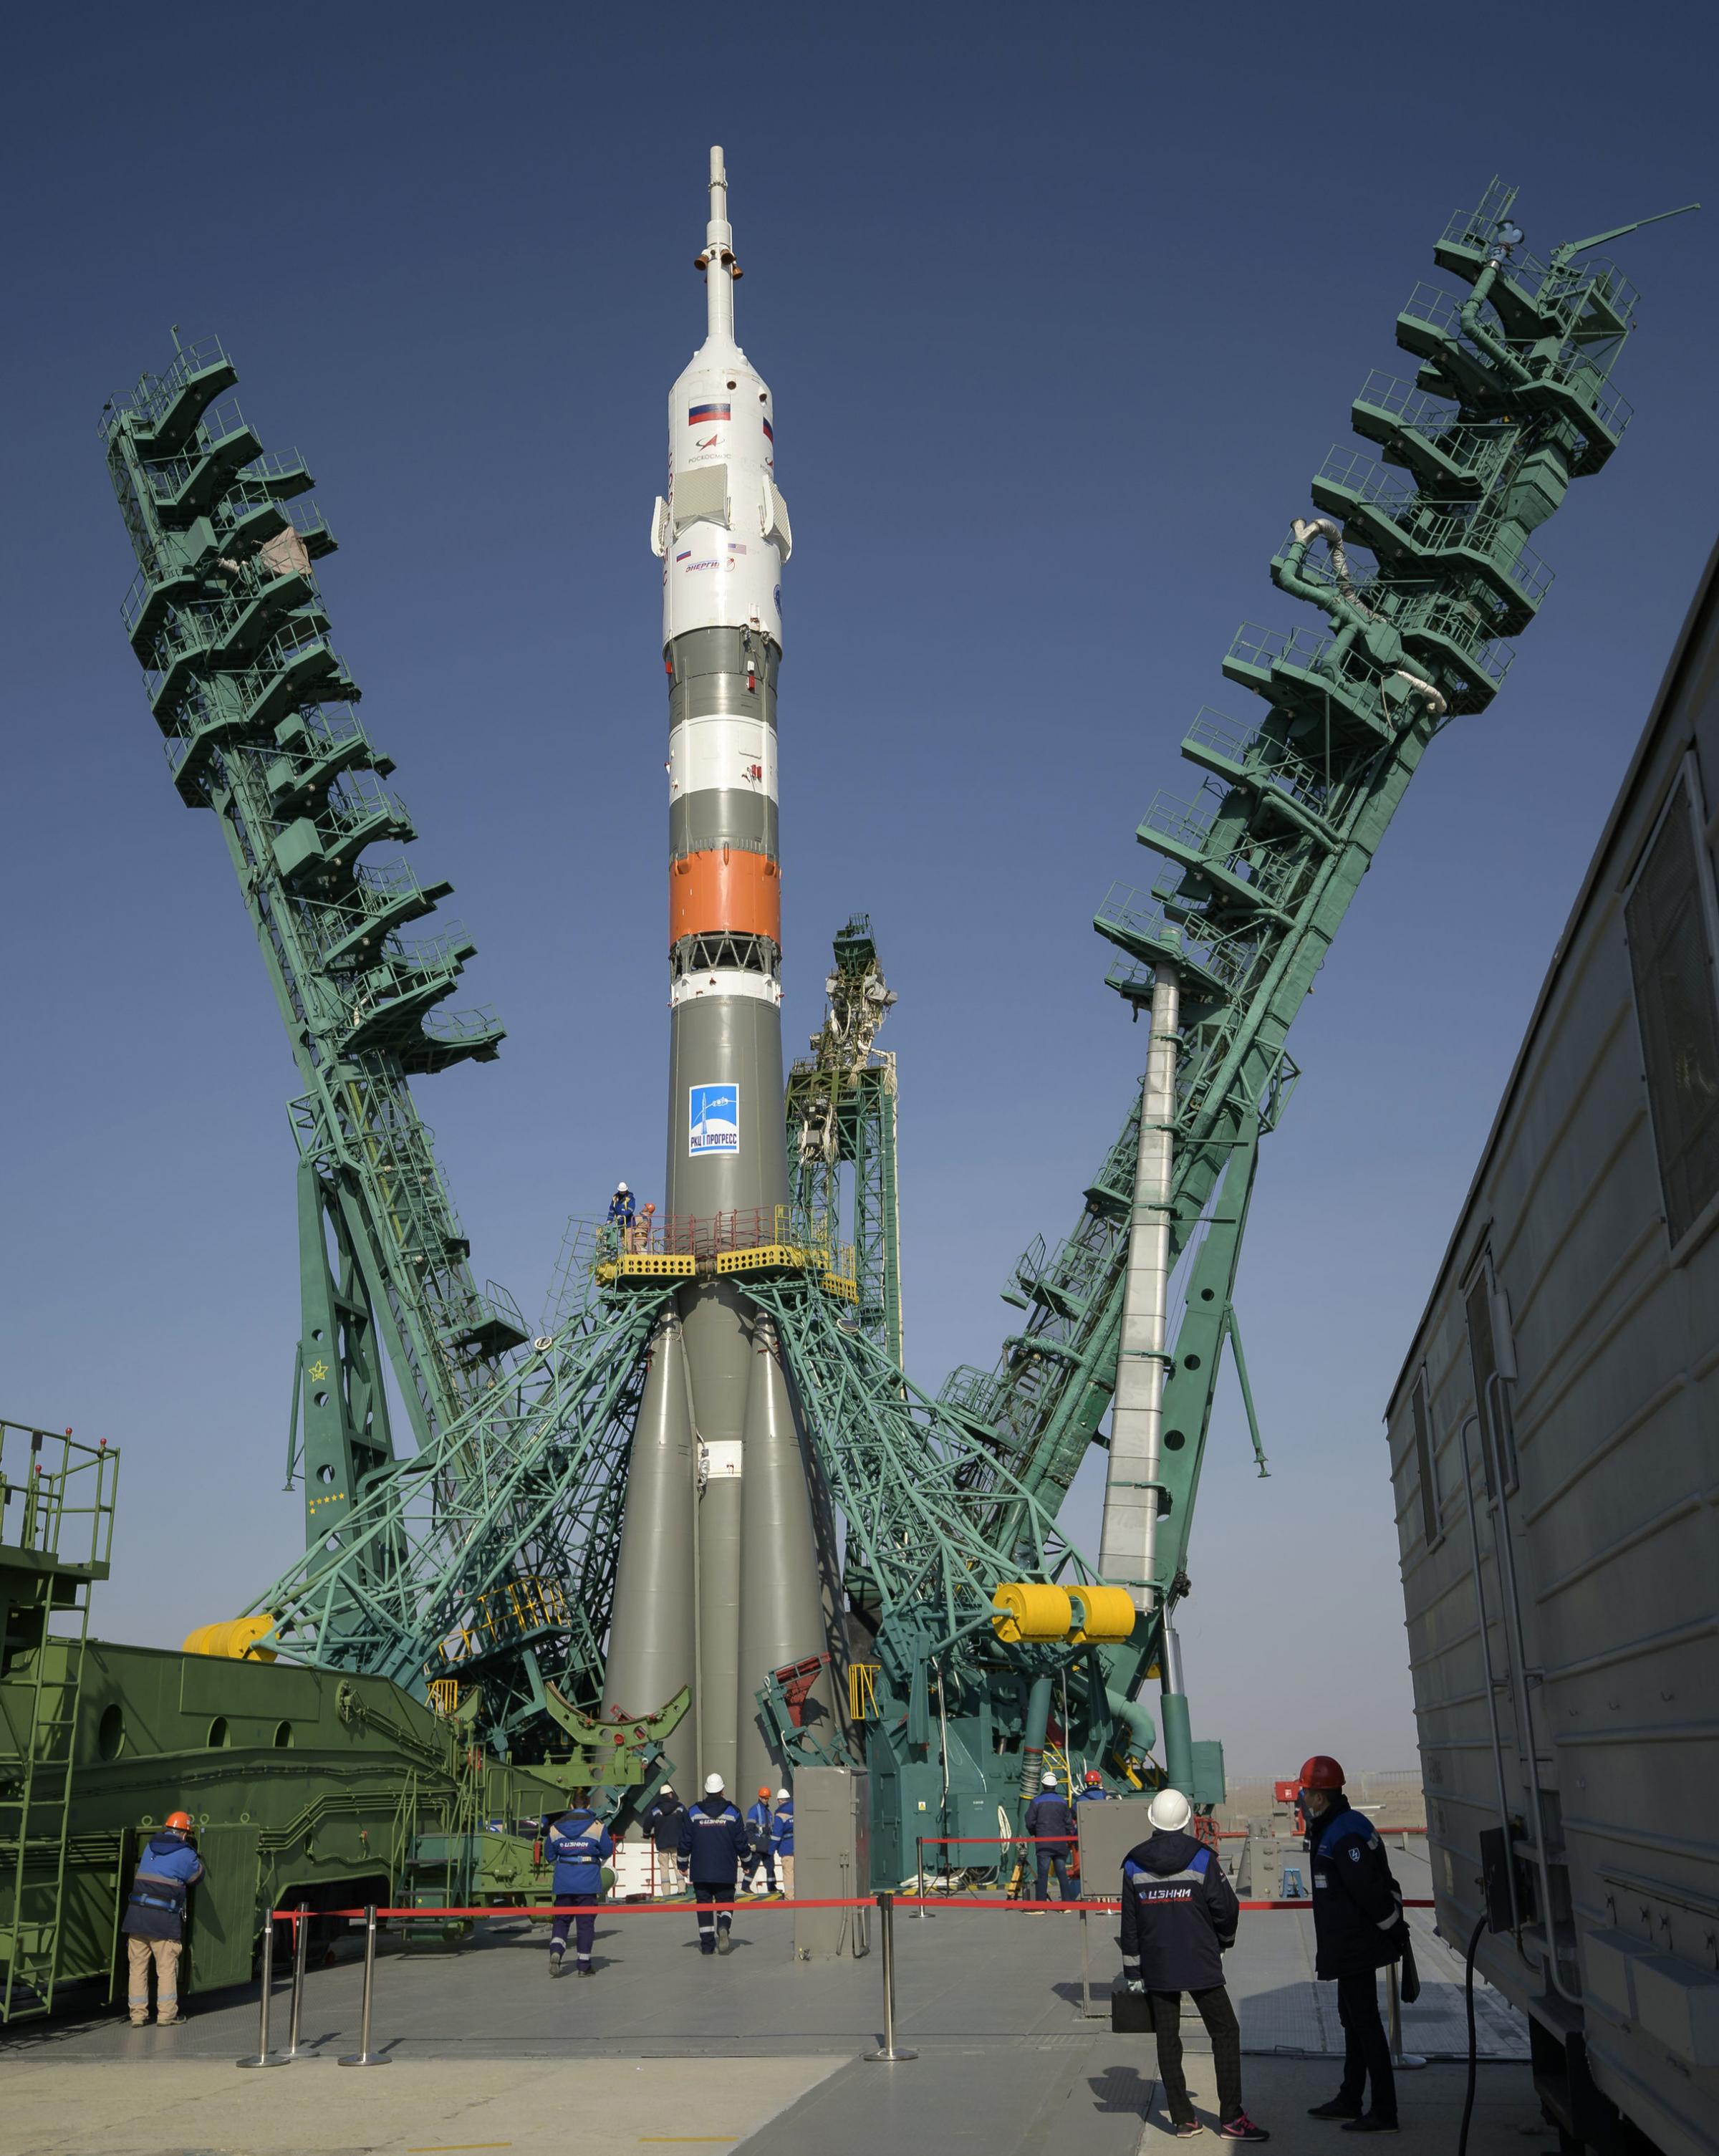 The service structure is lifted into position around a Soyuz rocket, at site 31 of the Baikonur Cosmodrome in Kazakhstan. Expedition 65 NASA astronaut Mark Vande Hei, Roscosmos cosmonauts Pyotr Dubrov and Oleg Novitskiy are scheduled to launch aboard